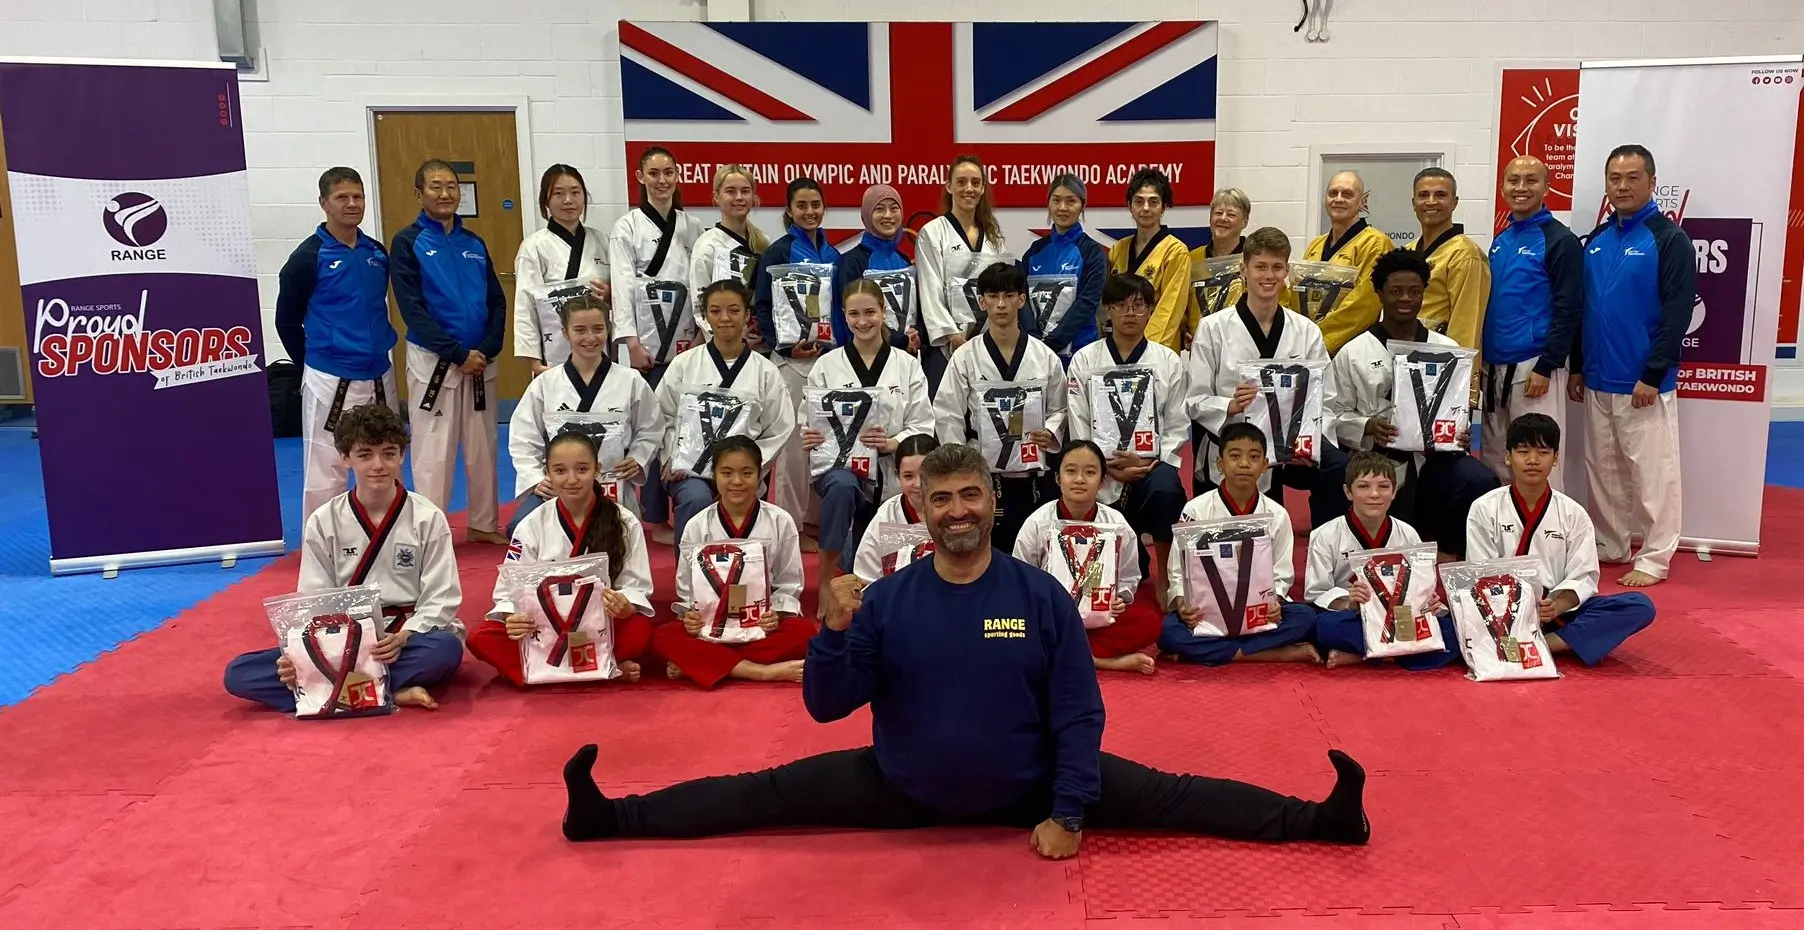 The Great Britain Poomsae Team has received its new uniforms from Range Sports UK Ltd